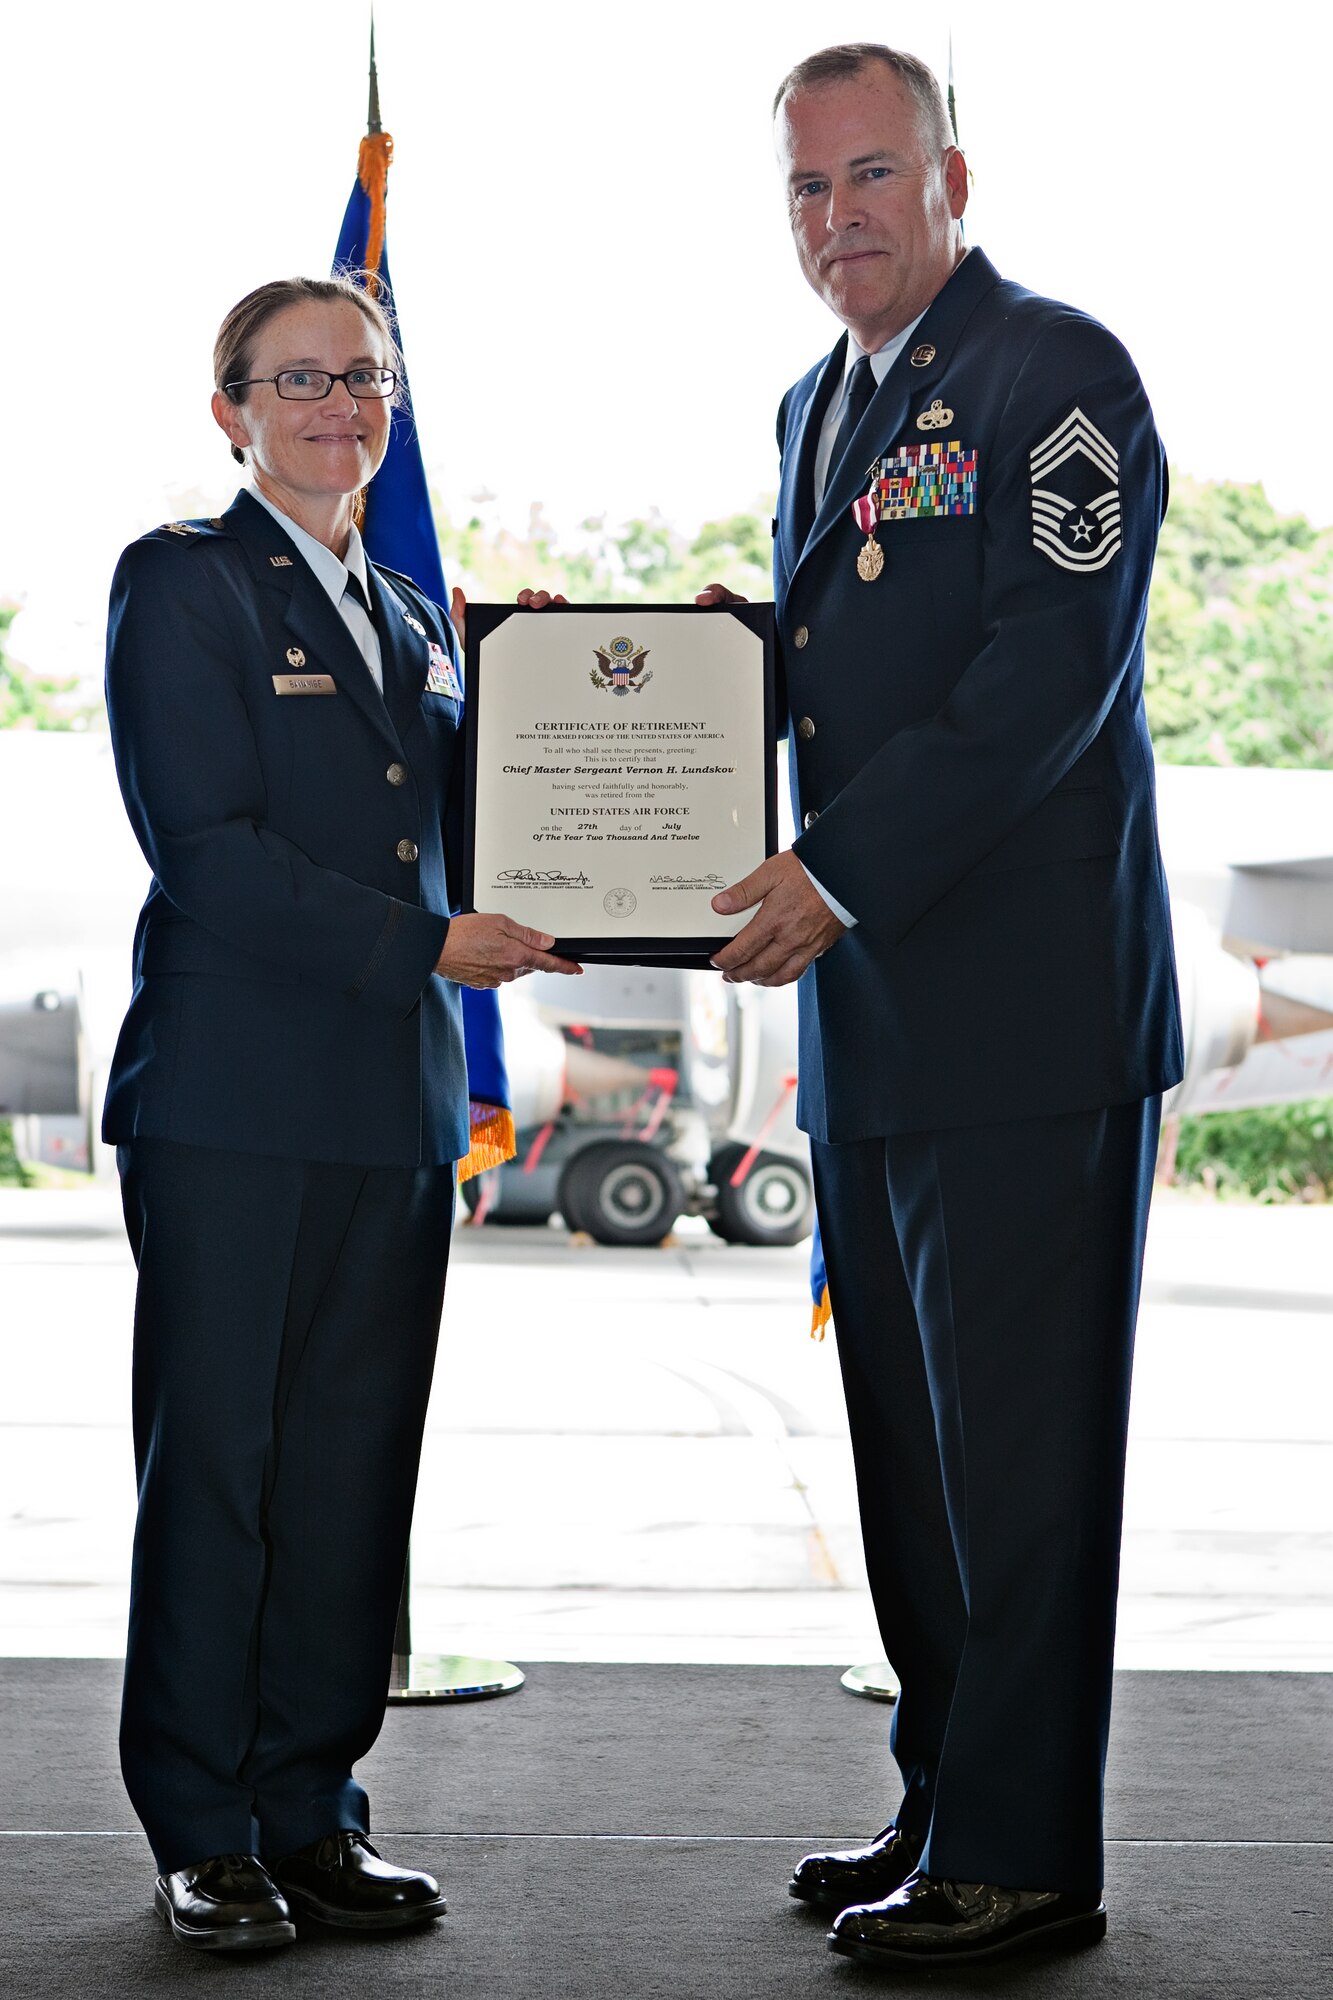 JOINT BASE ANDREWS, Md.,- Col. Maureen Banavige, commander of the 459th Maintenance Group and Chief Master Sgt. Vernon Lundskow, superintendent of the 459th Aircraft Maintenance Squadron, pose for a picture holding Lundskow’s retirement certificate  during his retirement ceremony, July 14, 2012 in Hangar 10, here. Lundskow has been the rank of chief master sergeant for 22 years and retires from the military with 37 years of service; 22 years in the U.S. Air Force Reserve and five years with the U.S. Navy. (U.S. Air Force photo/Staff Sgt. John Meyer)